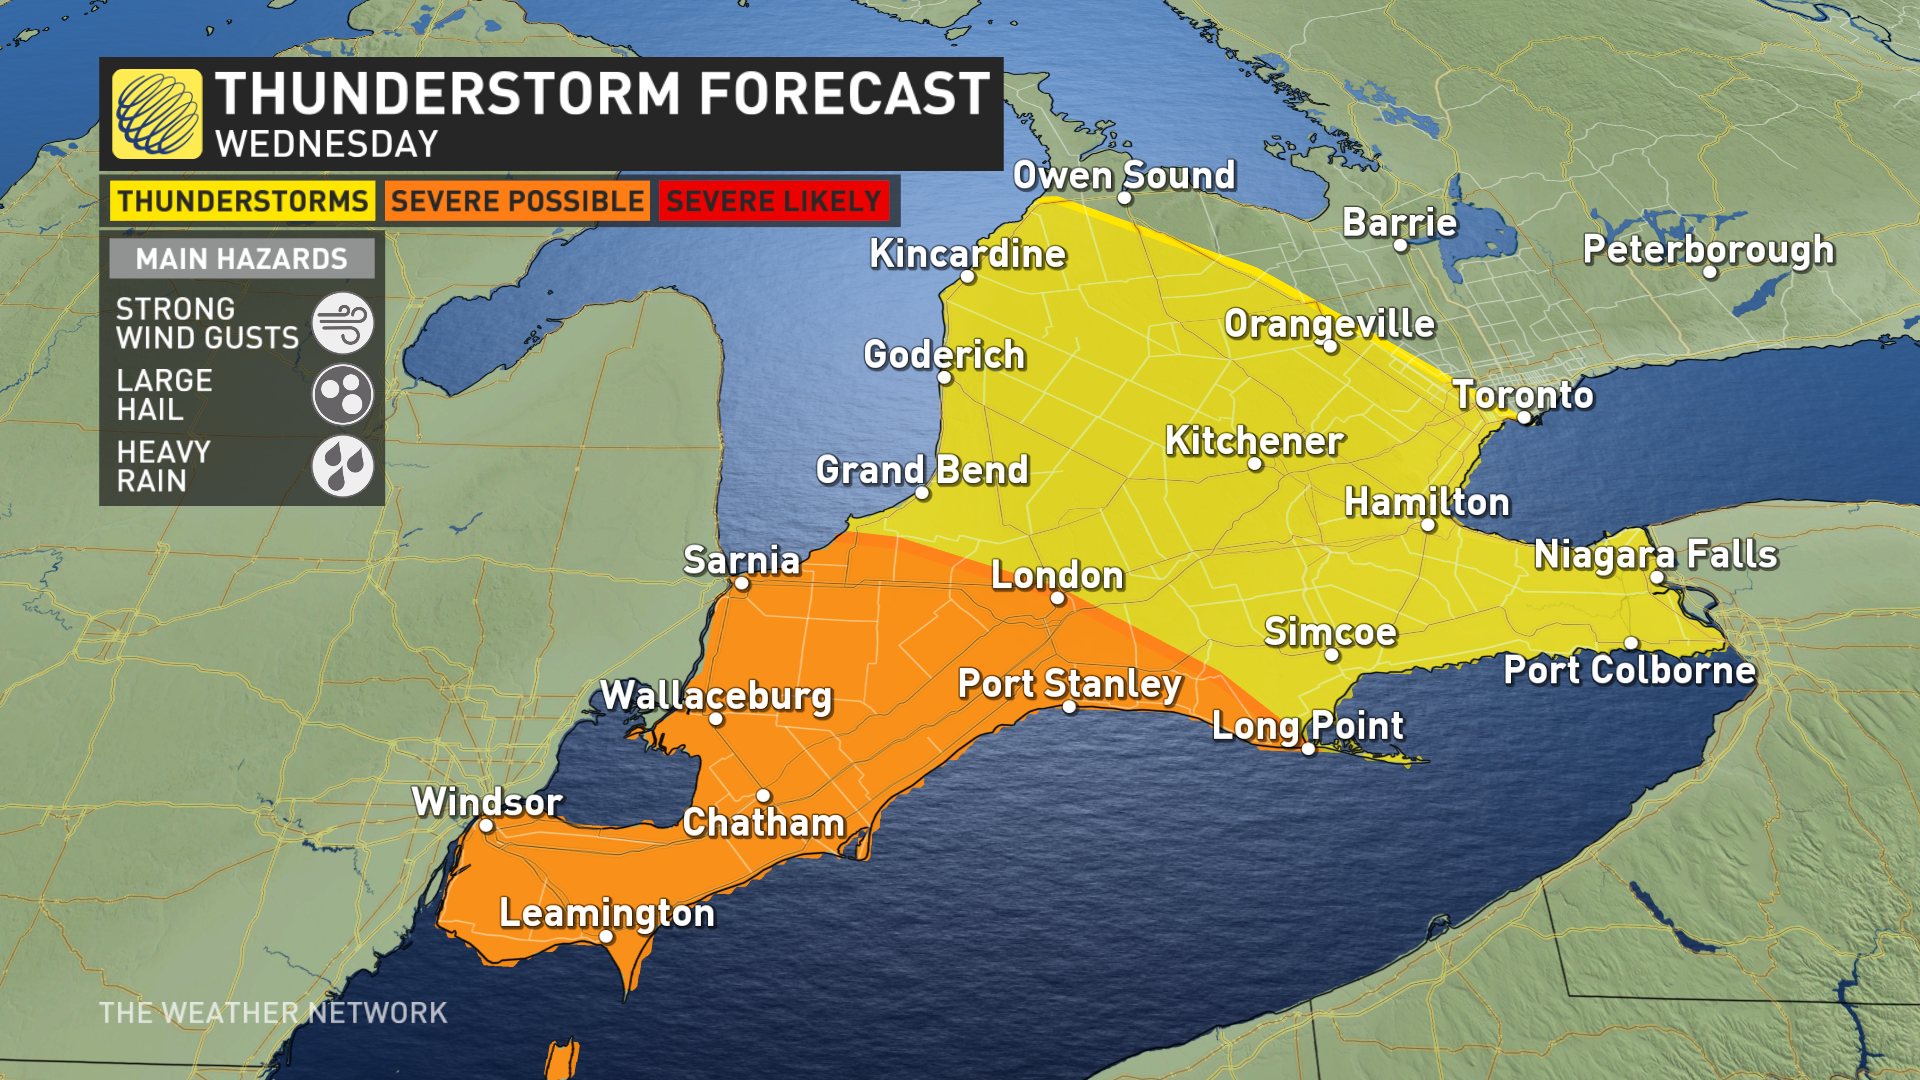 rounds of rain, thunderstorms hit ontario, risk for large hail and strong winds